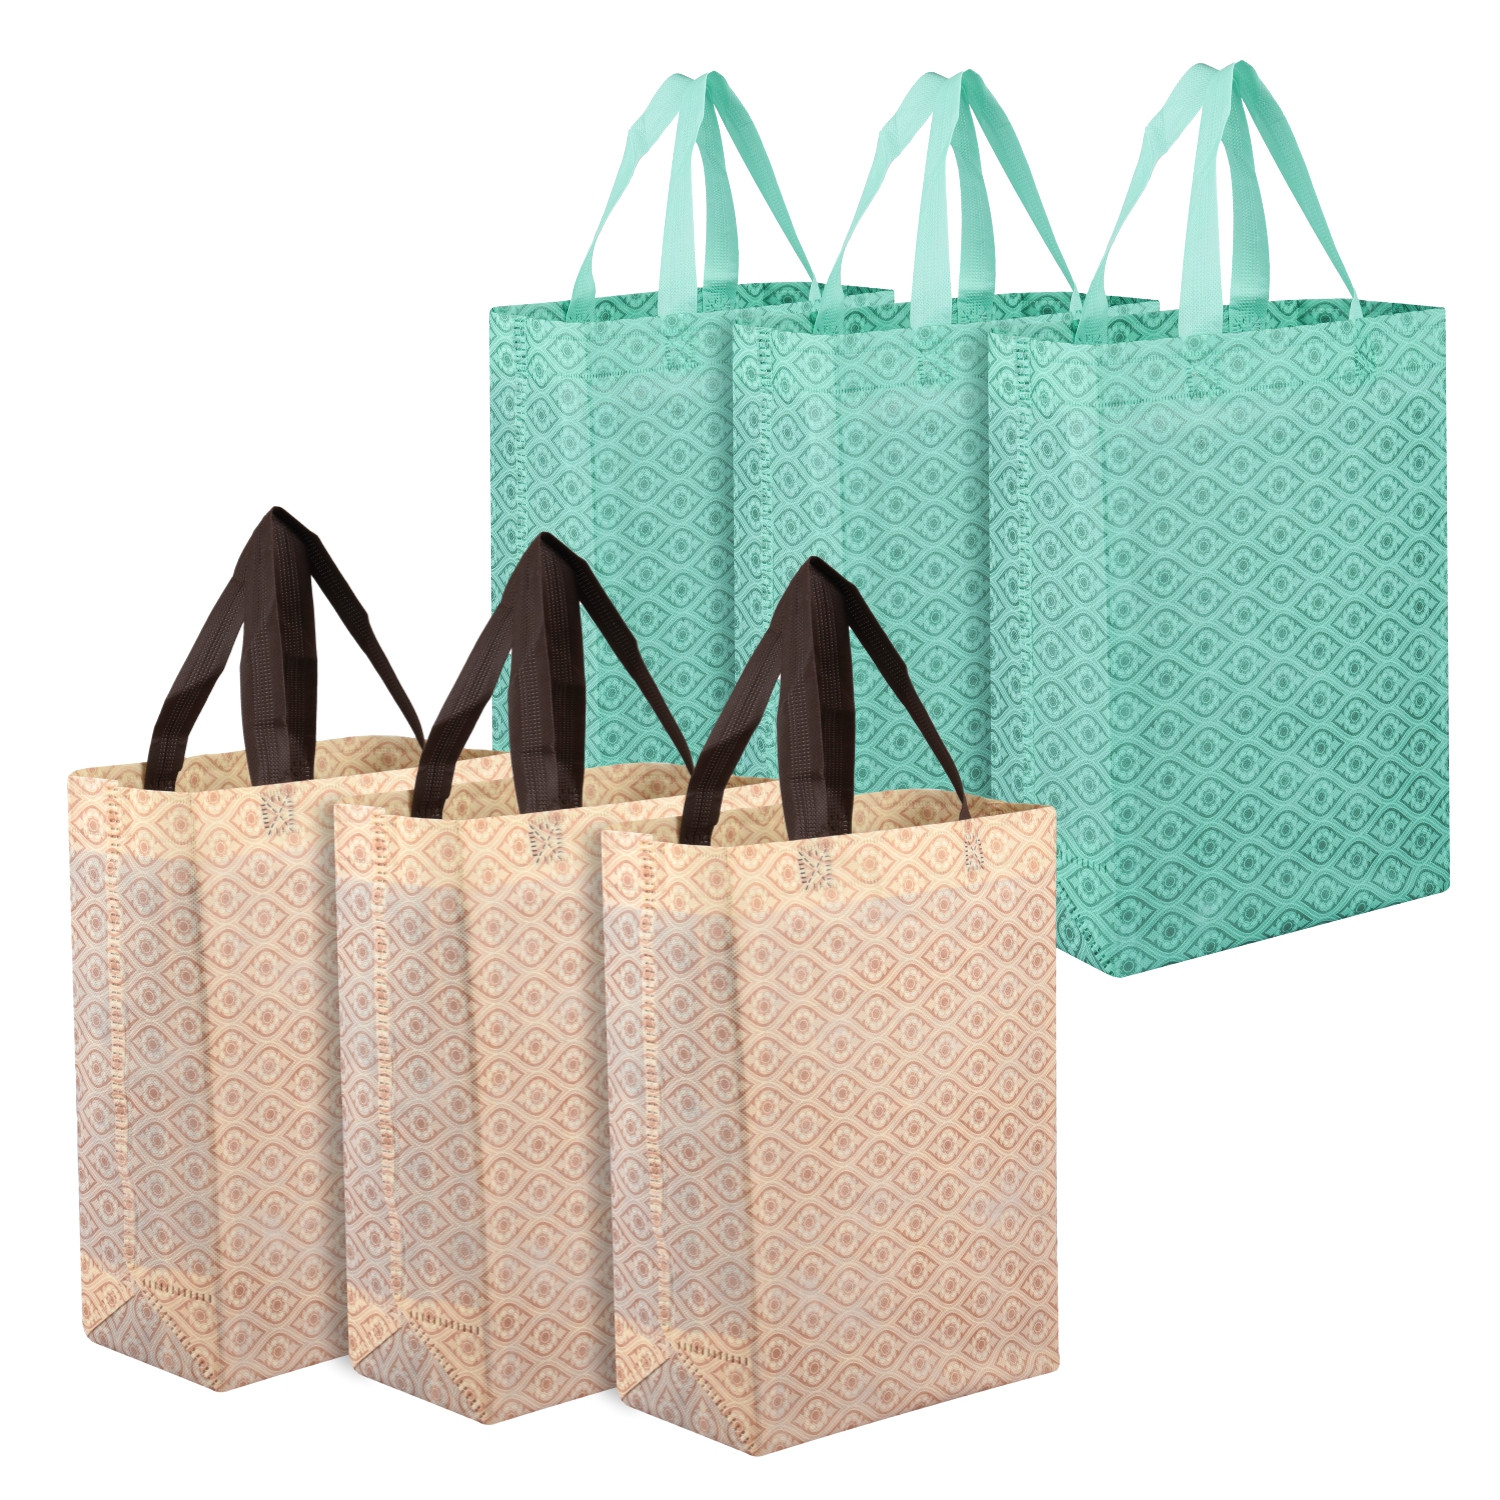 How to clean reusable shopping bags